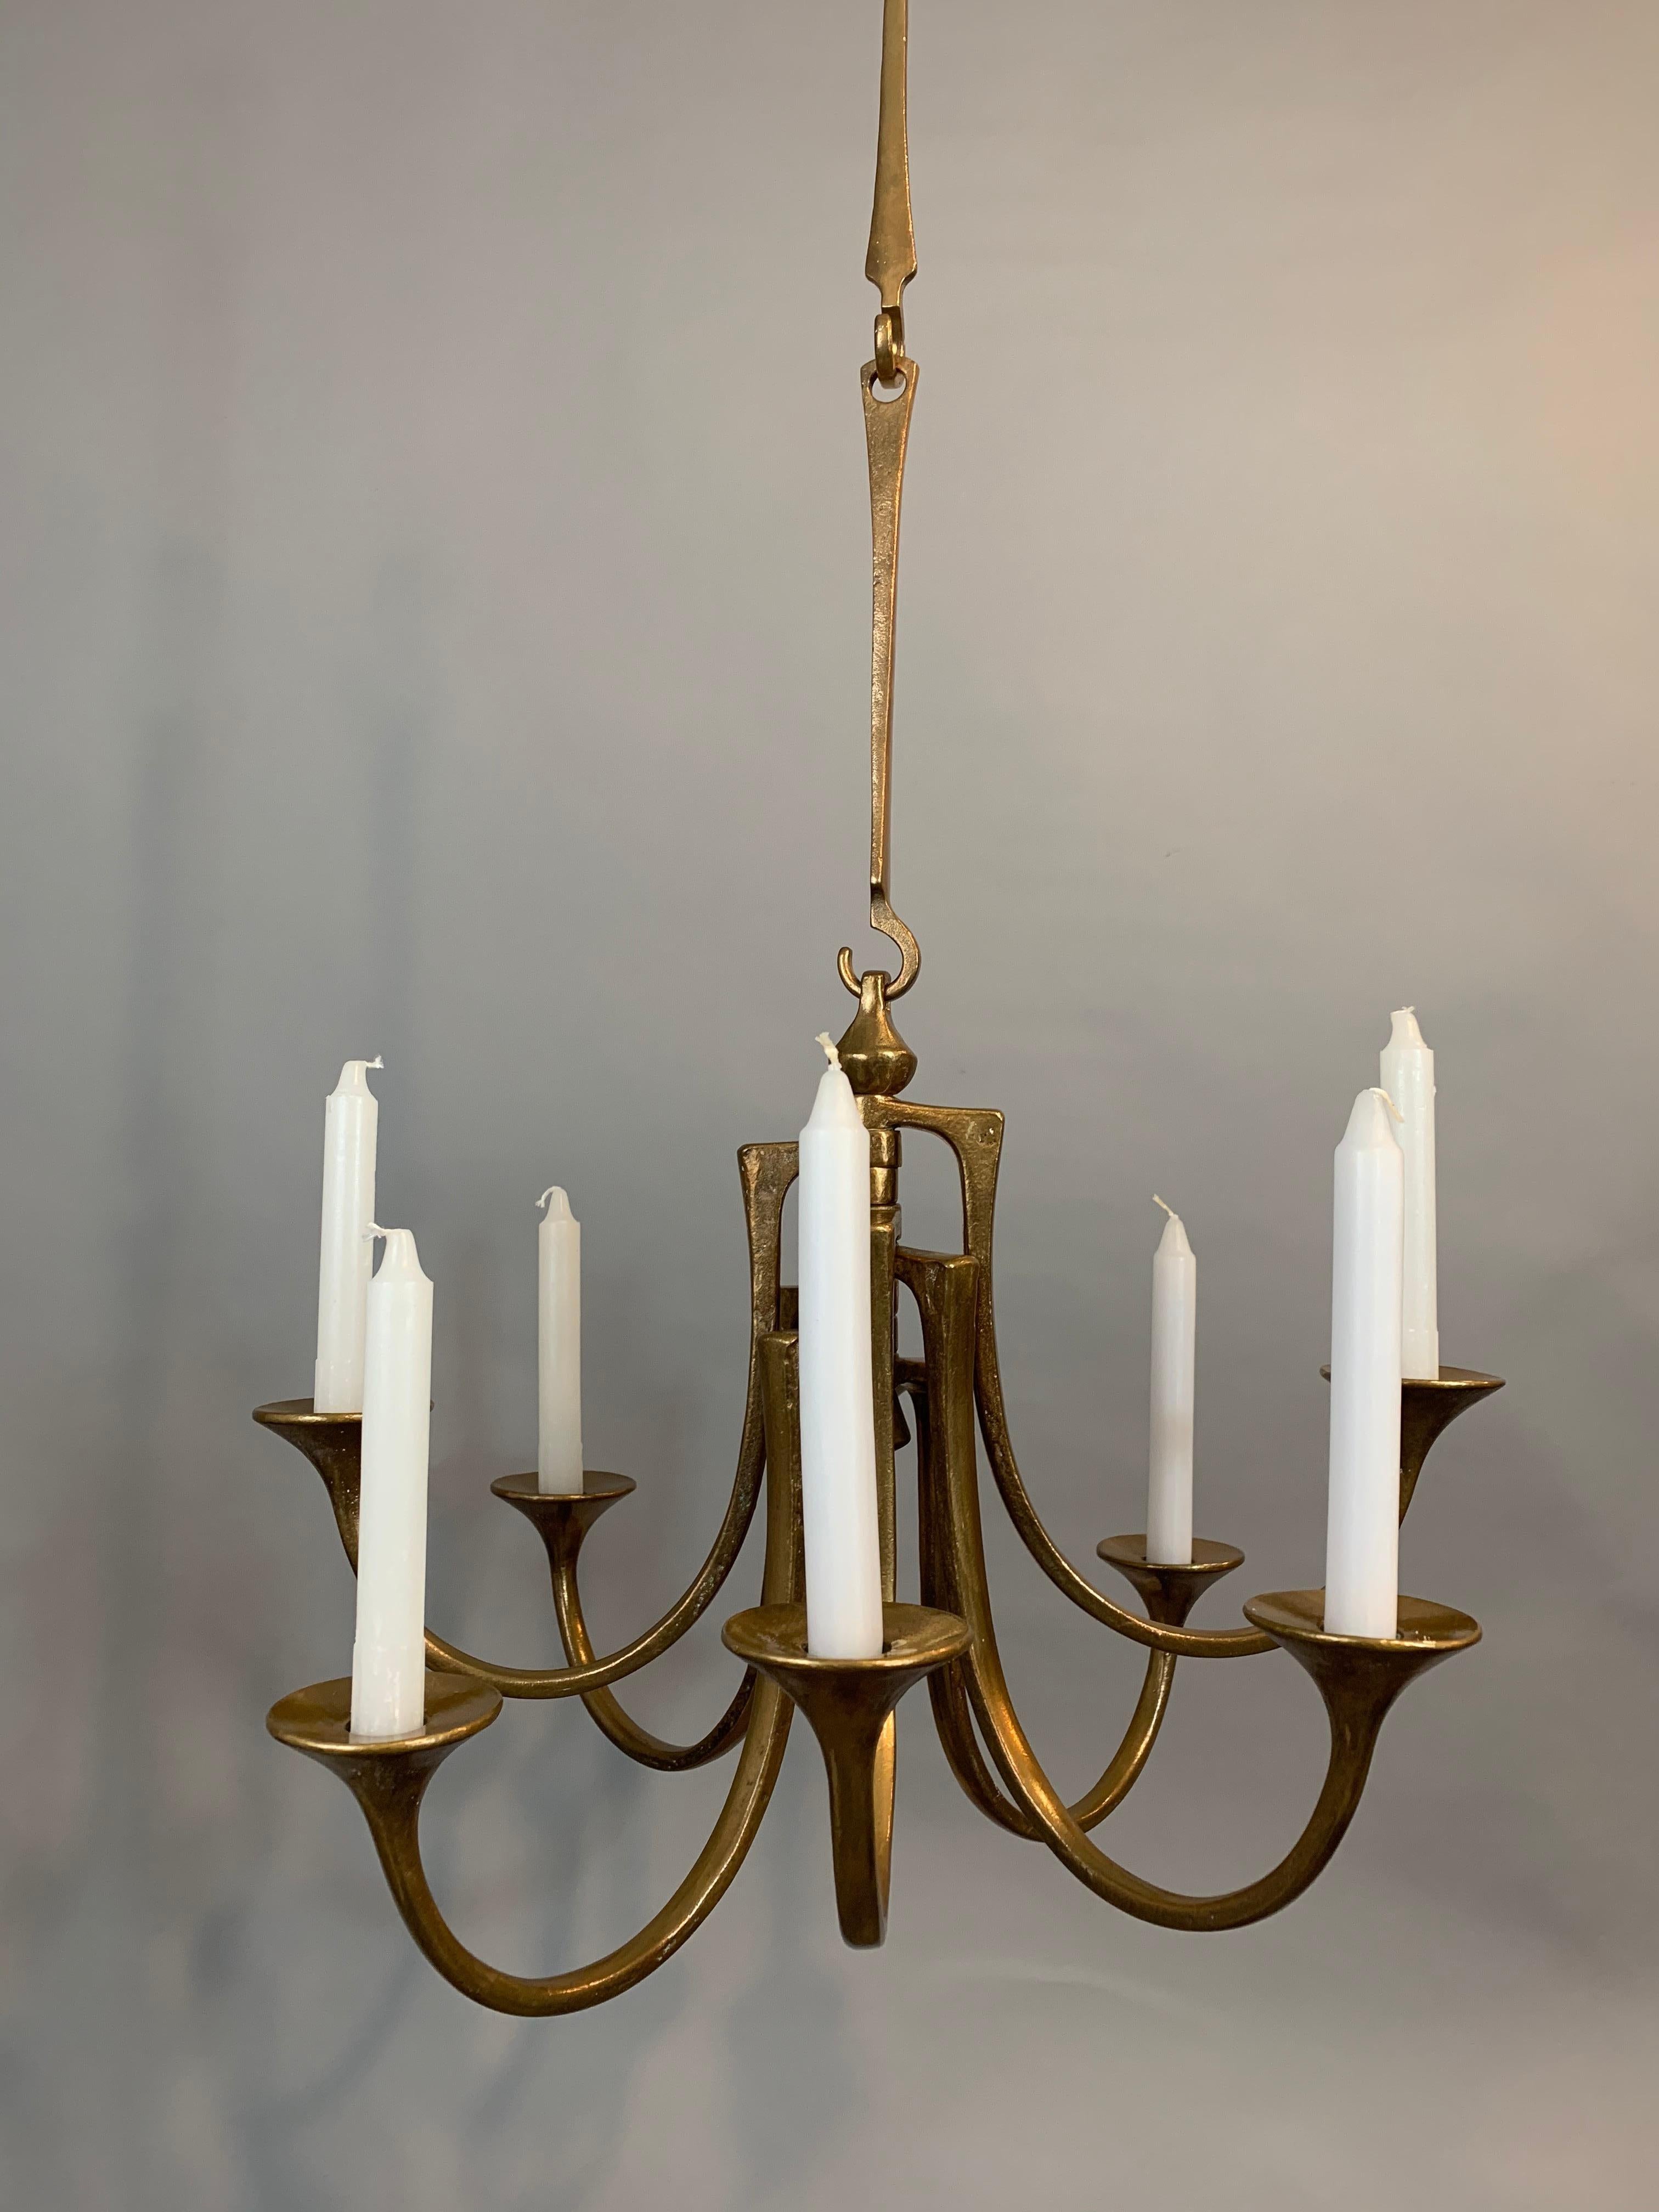 1960s Brutalist hanging bronze pendant candleholder designed by Michael Harjes and produced by Harjes Metalkunst in Germany. The piece is composed of 8 cast-bronze arms which hold one candle in each one. The candleholder is suspended from bronze